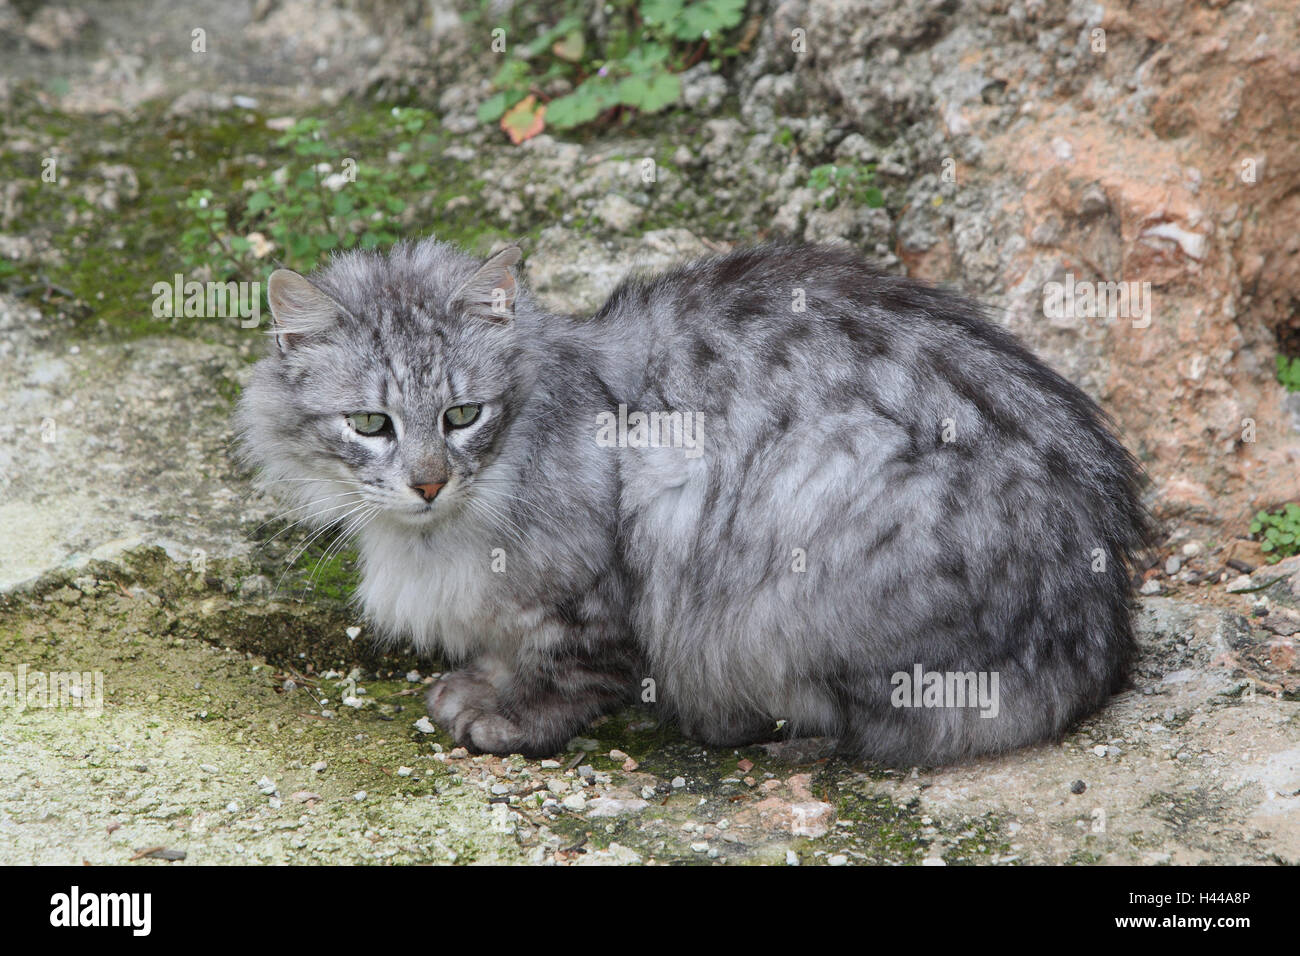 Cats, long hair, grey, striped, crouch, animals, mammals, pets, small cats, Felidae, medium-length hair, half long-haired cat, domesticates, house cat, without Lord, day release prisoners, individually, only, stray, street cat, outside, wayside, Spain, Stock Photo